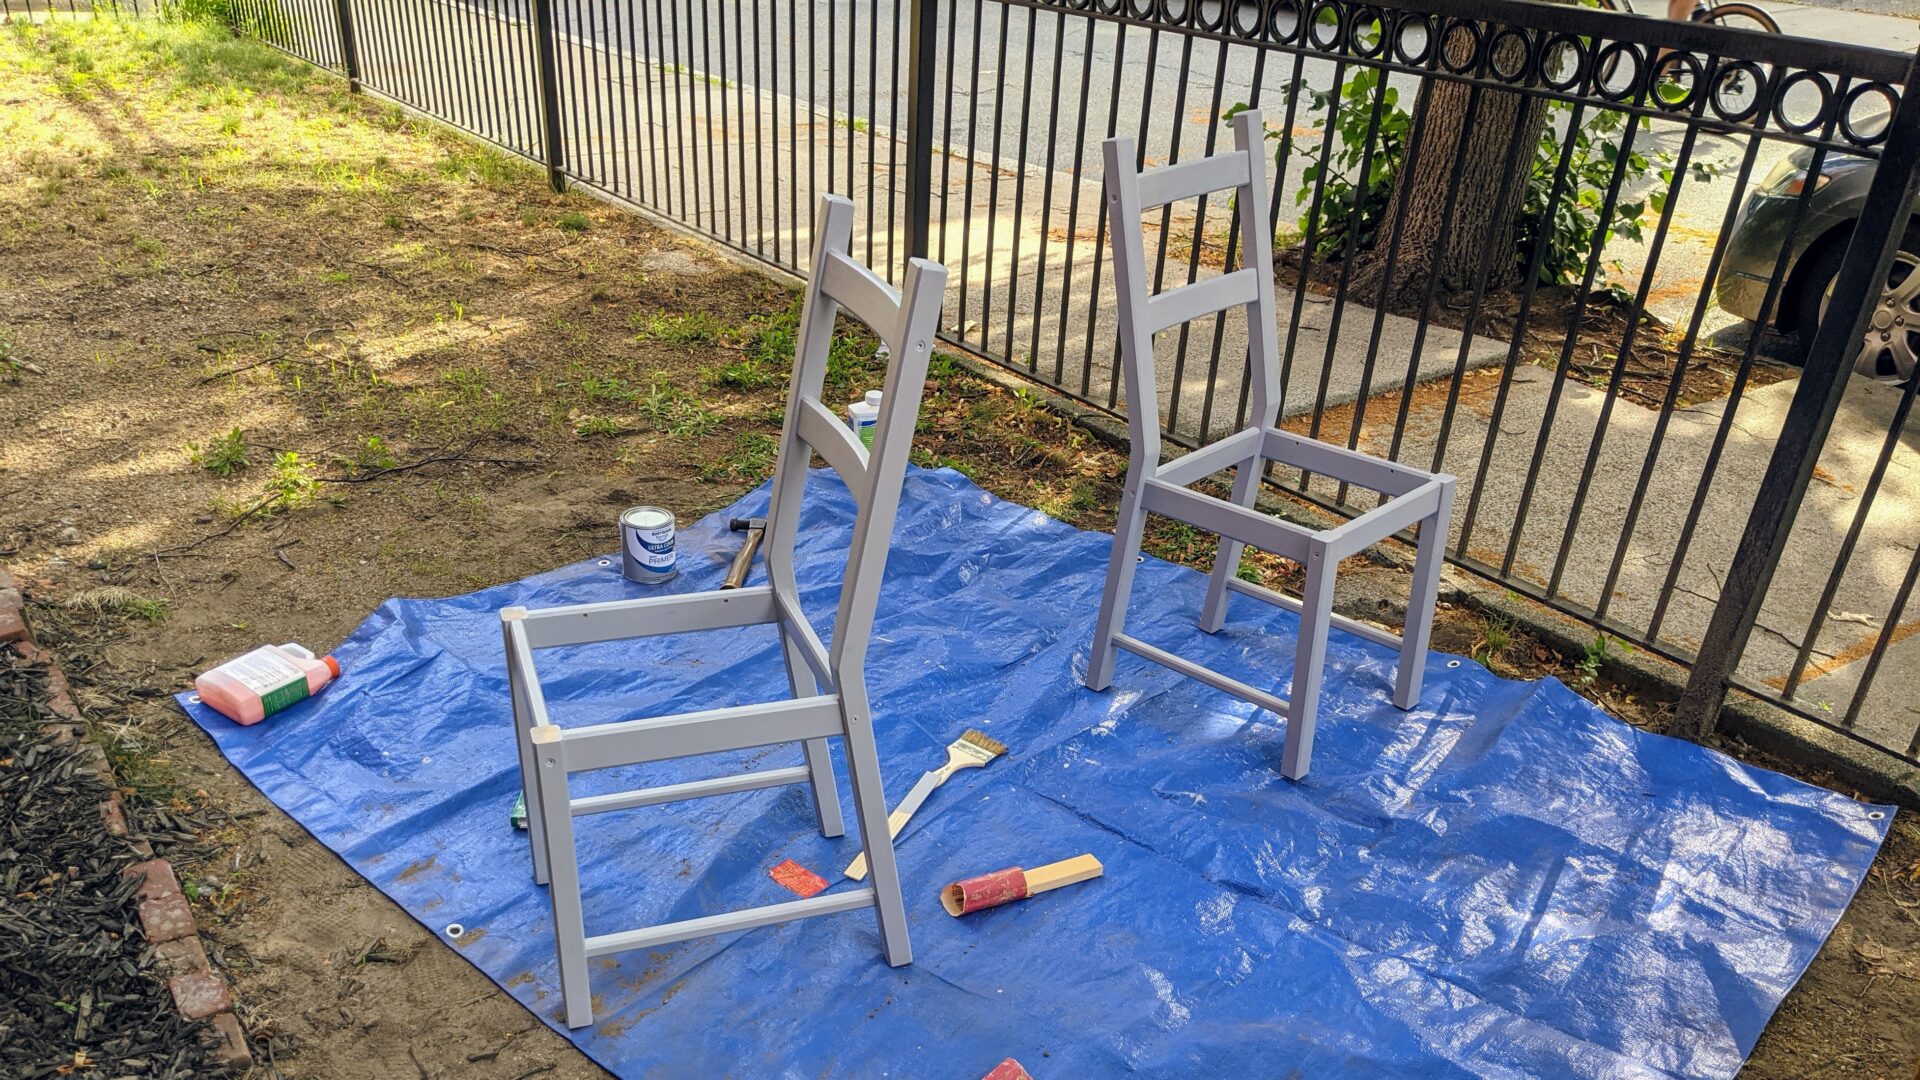 Chairs primed